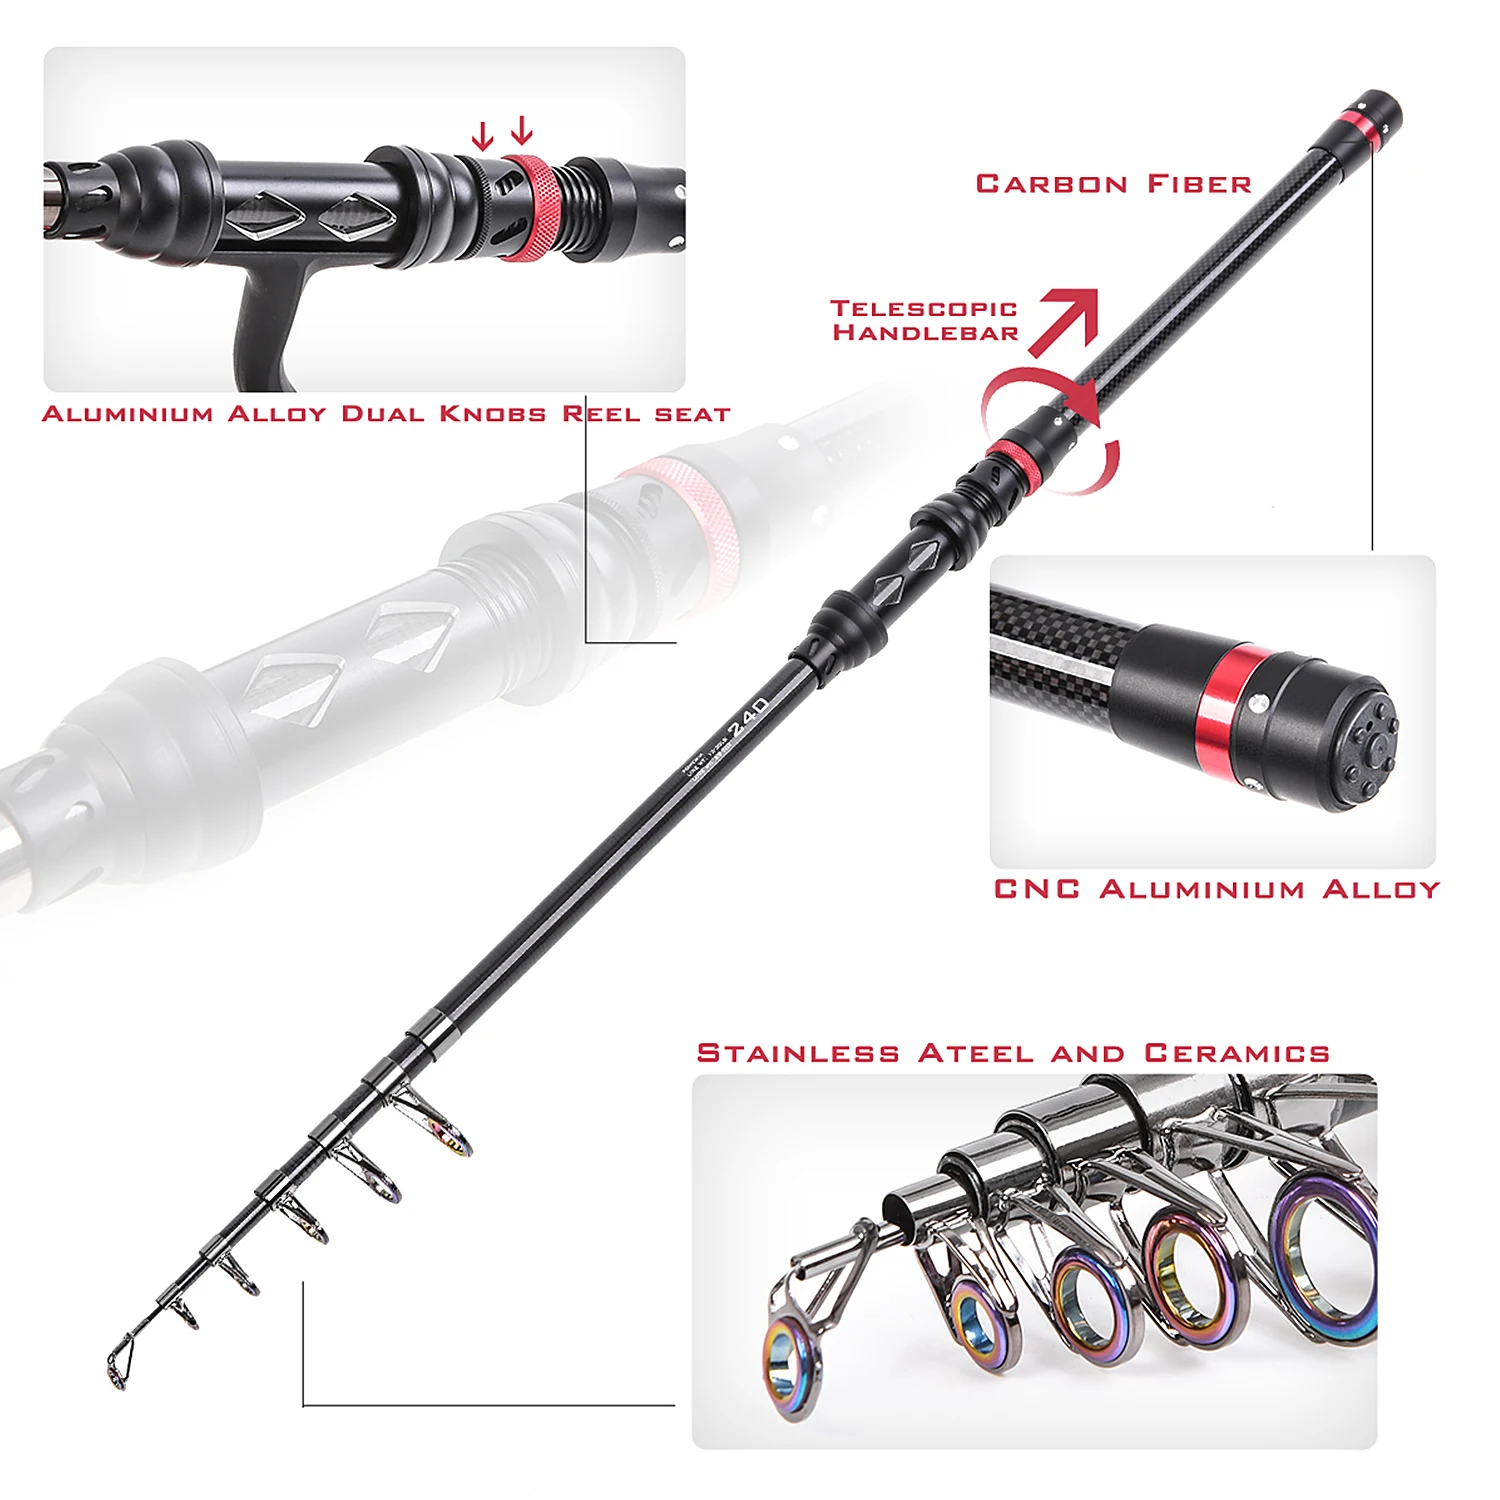 Carbon Firble Telescopic Spinning Fishing Pole Rod and Reel Combo FULL KIT with Jig Lures Treble Hooks Beads Swivel Snap Sinker Sliders Fishing Carrier Bag Case Fishing Gear Organizer 